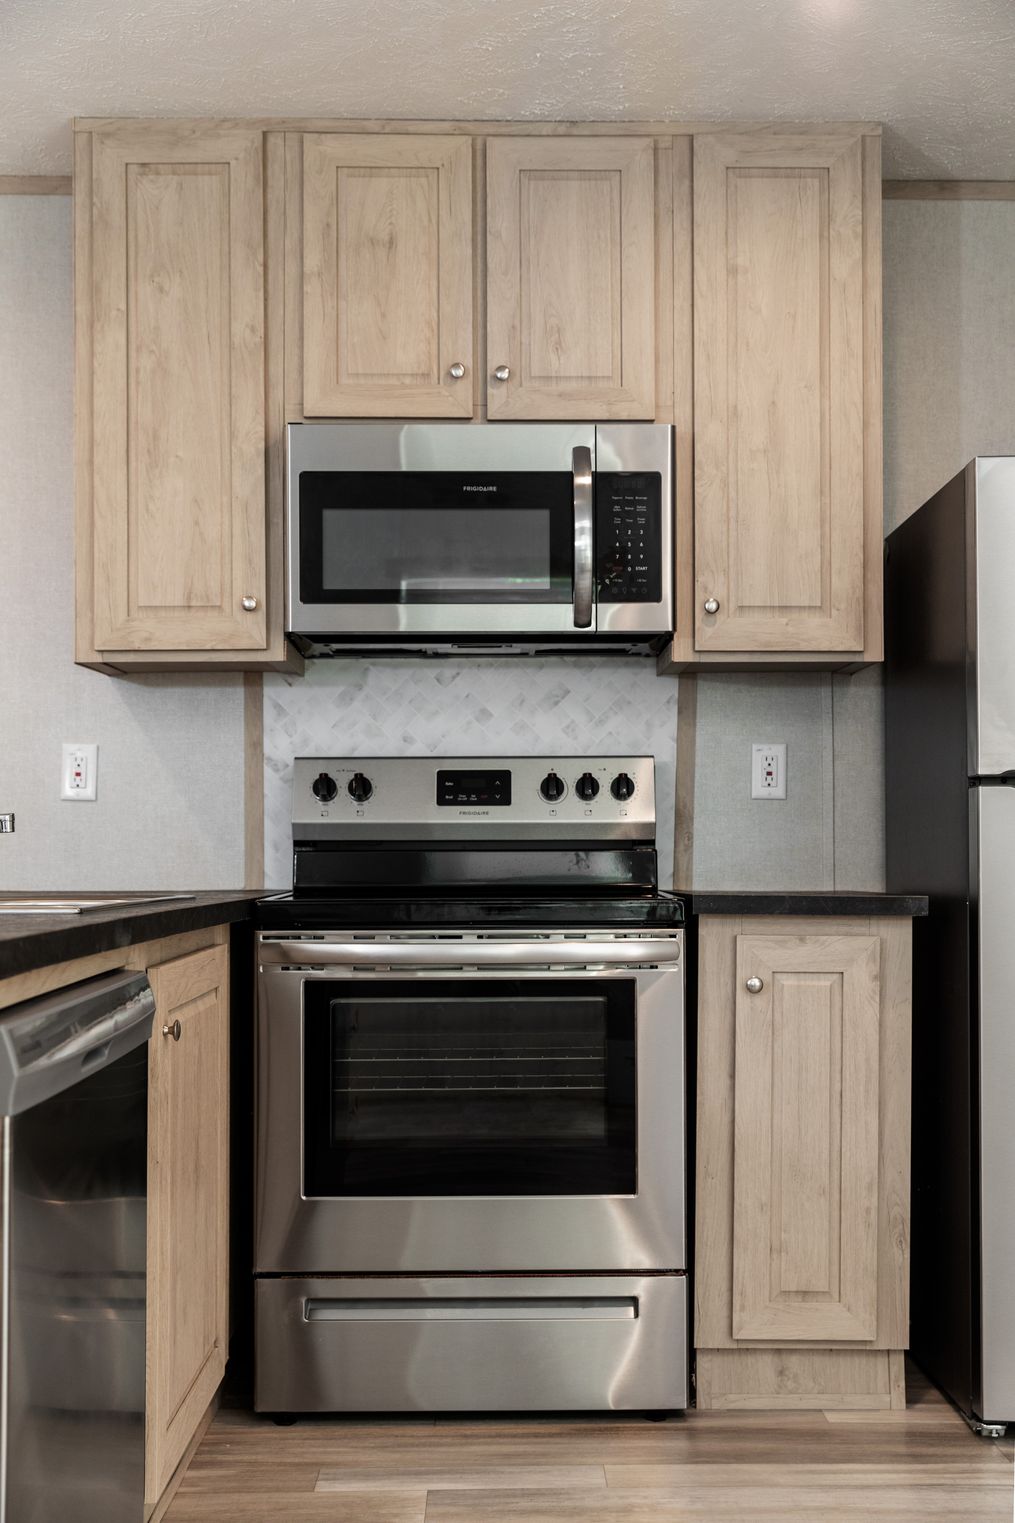 The BLAZER 48 A Kitchen. This Manufactured Mobile Home features 2 bedrooms and 1 bath.